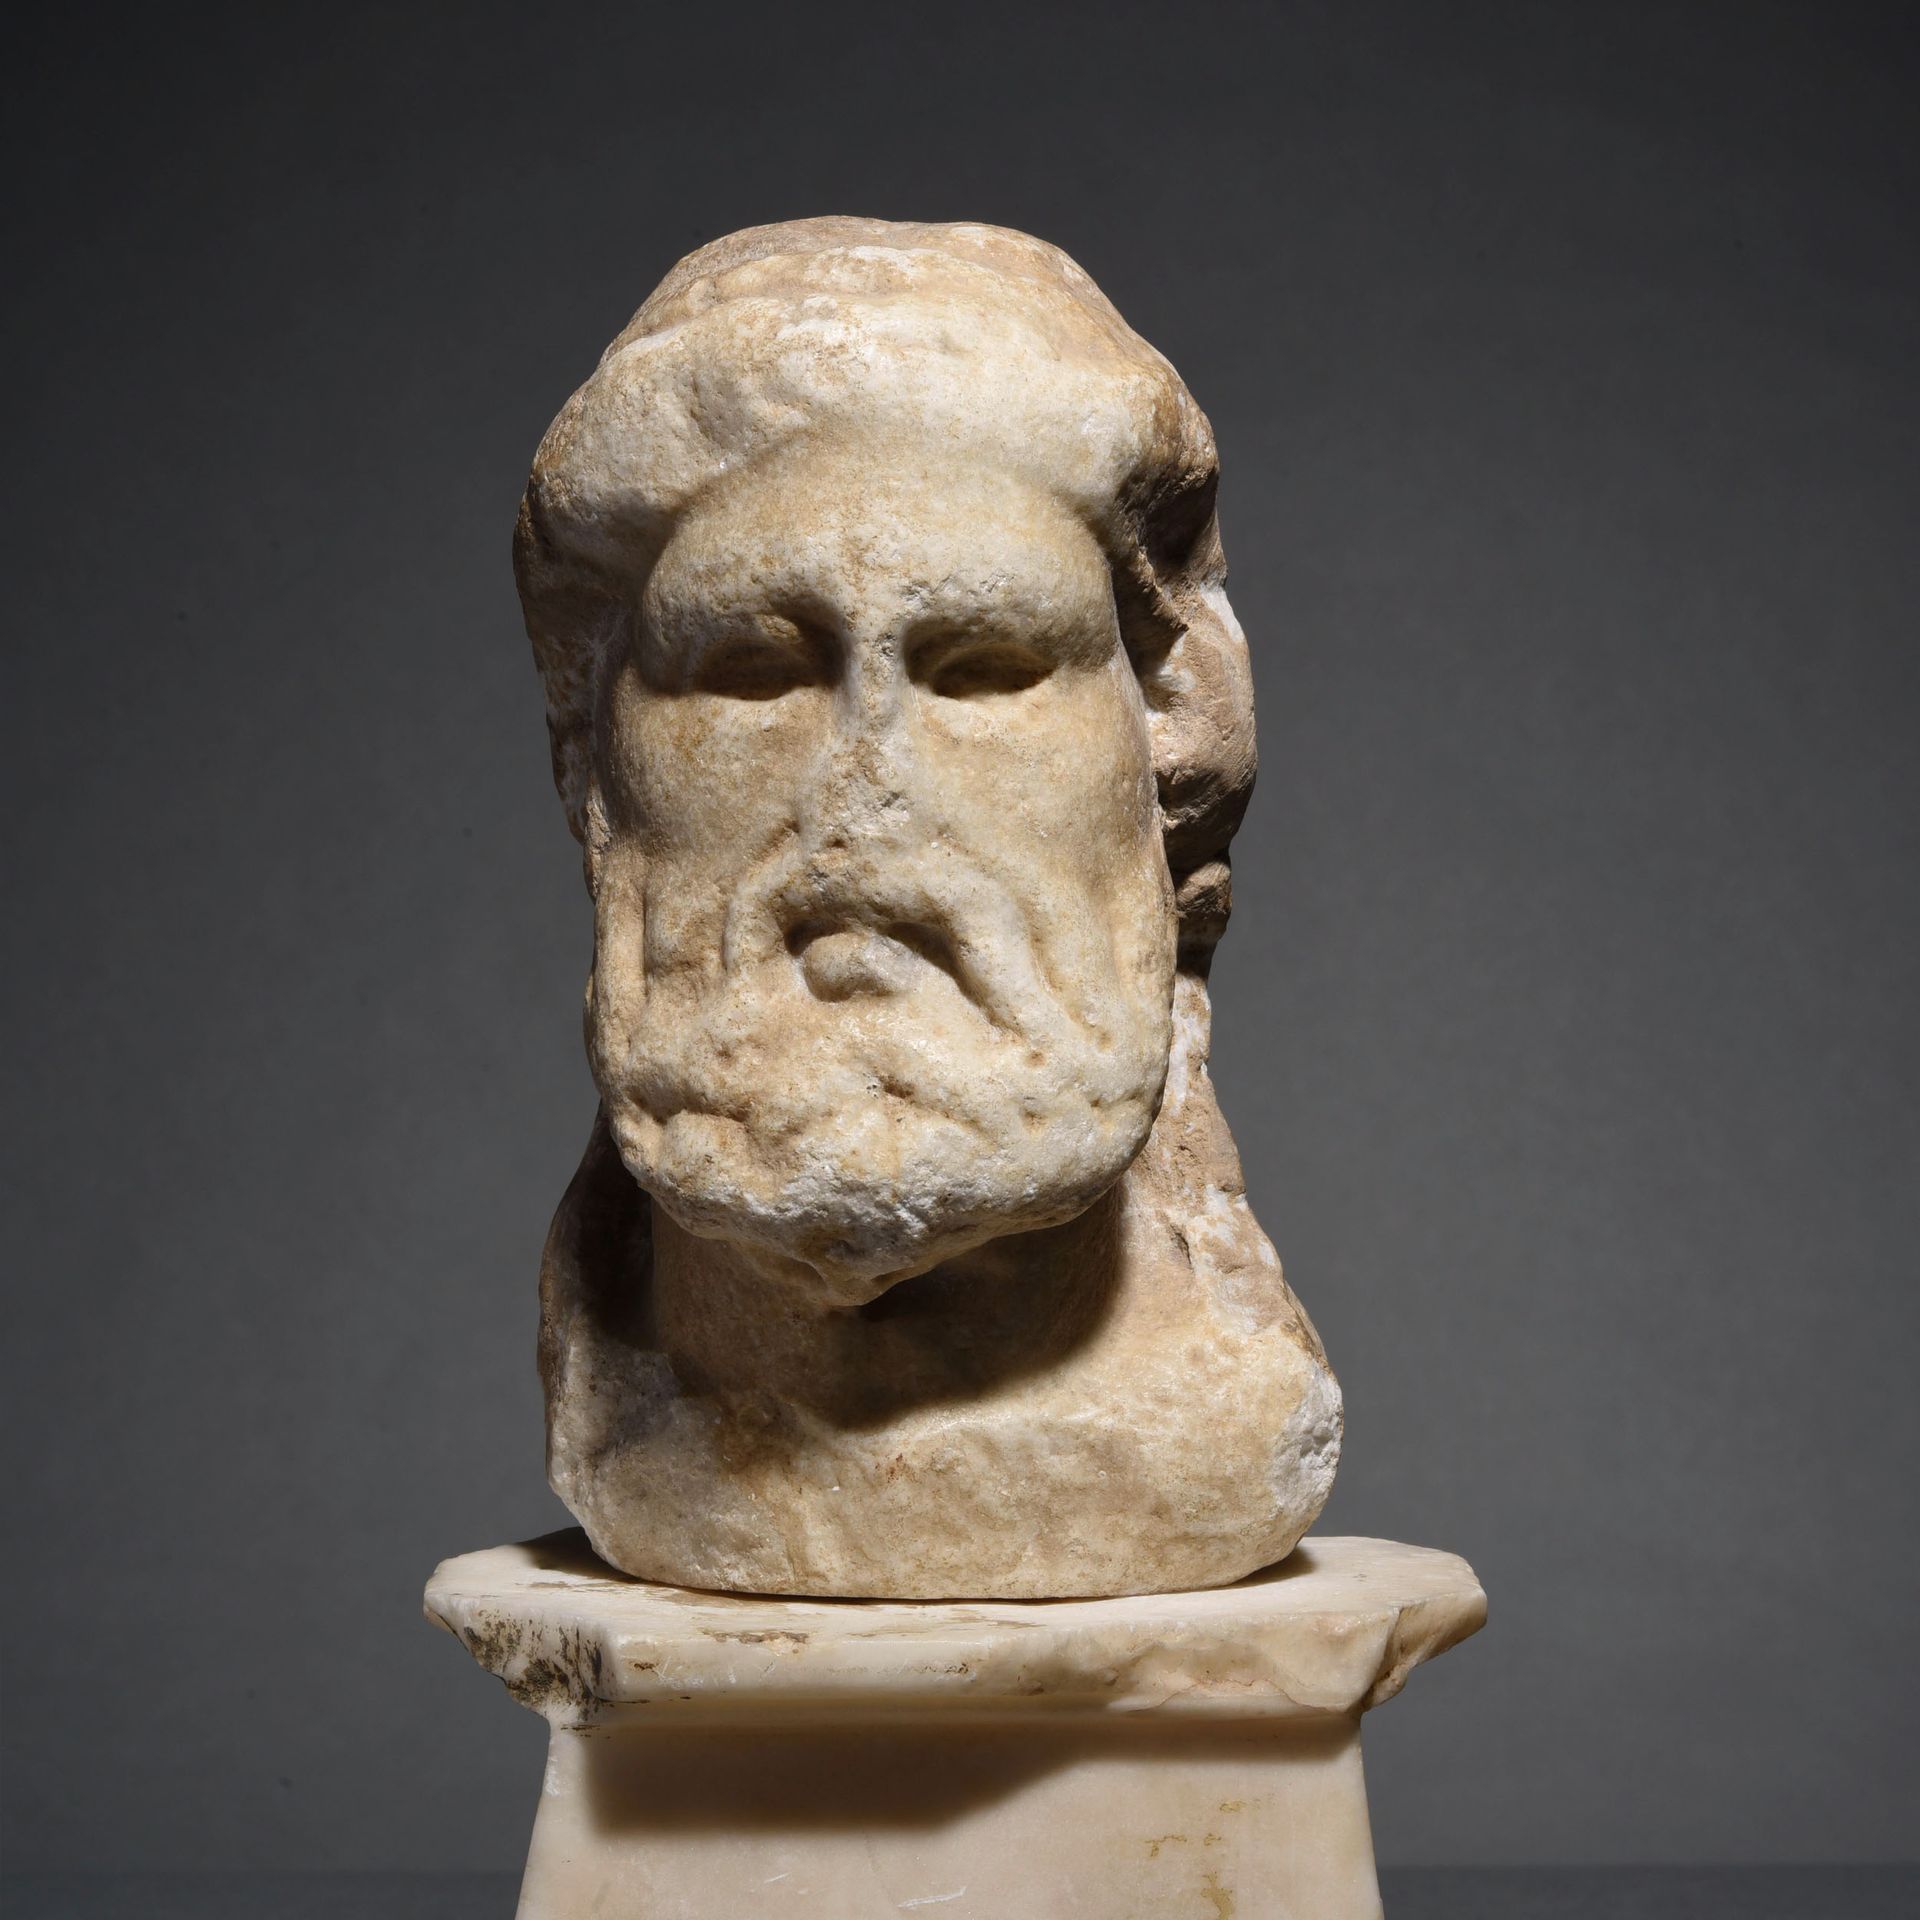 Null DIONYSIAN HERM

Roman art, 1st century AD

In marble, burned. The face is c&hellip;